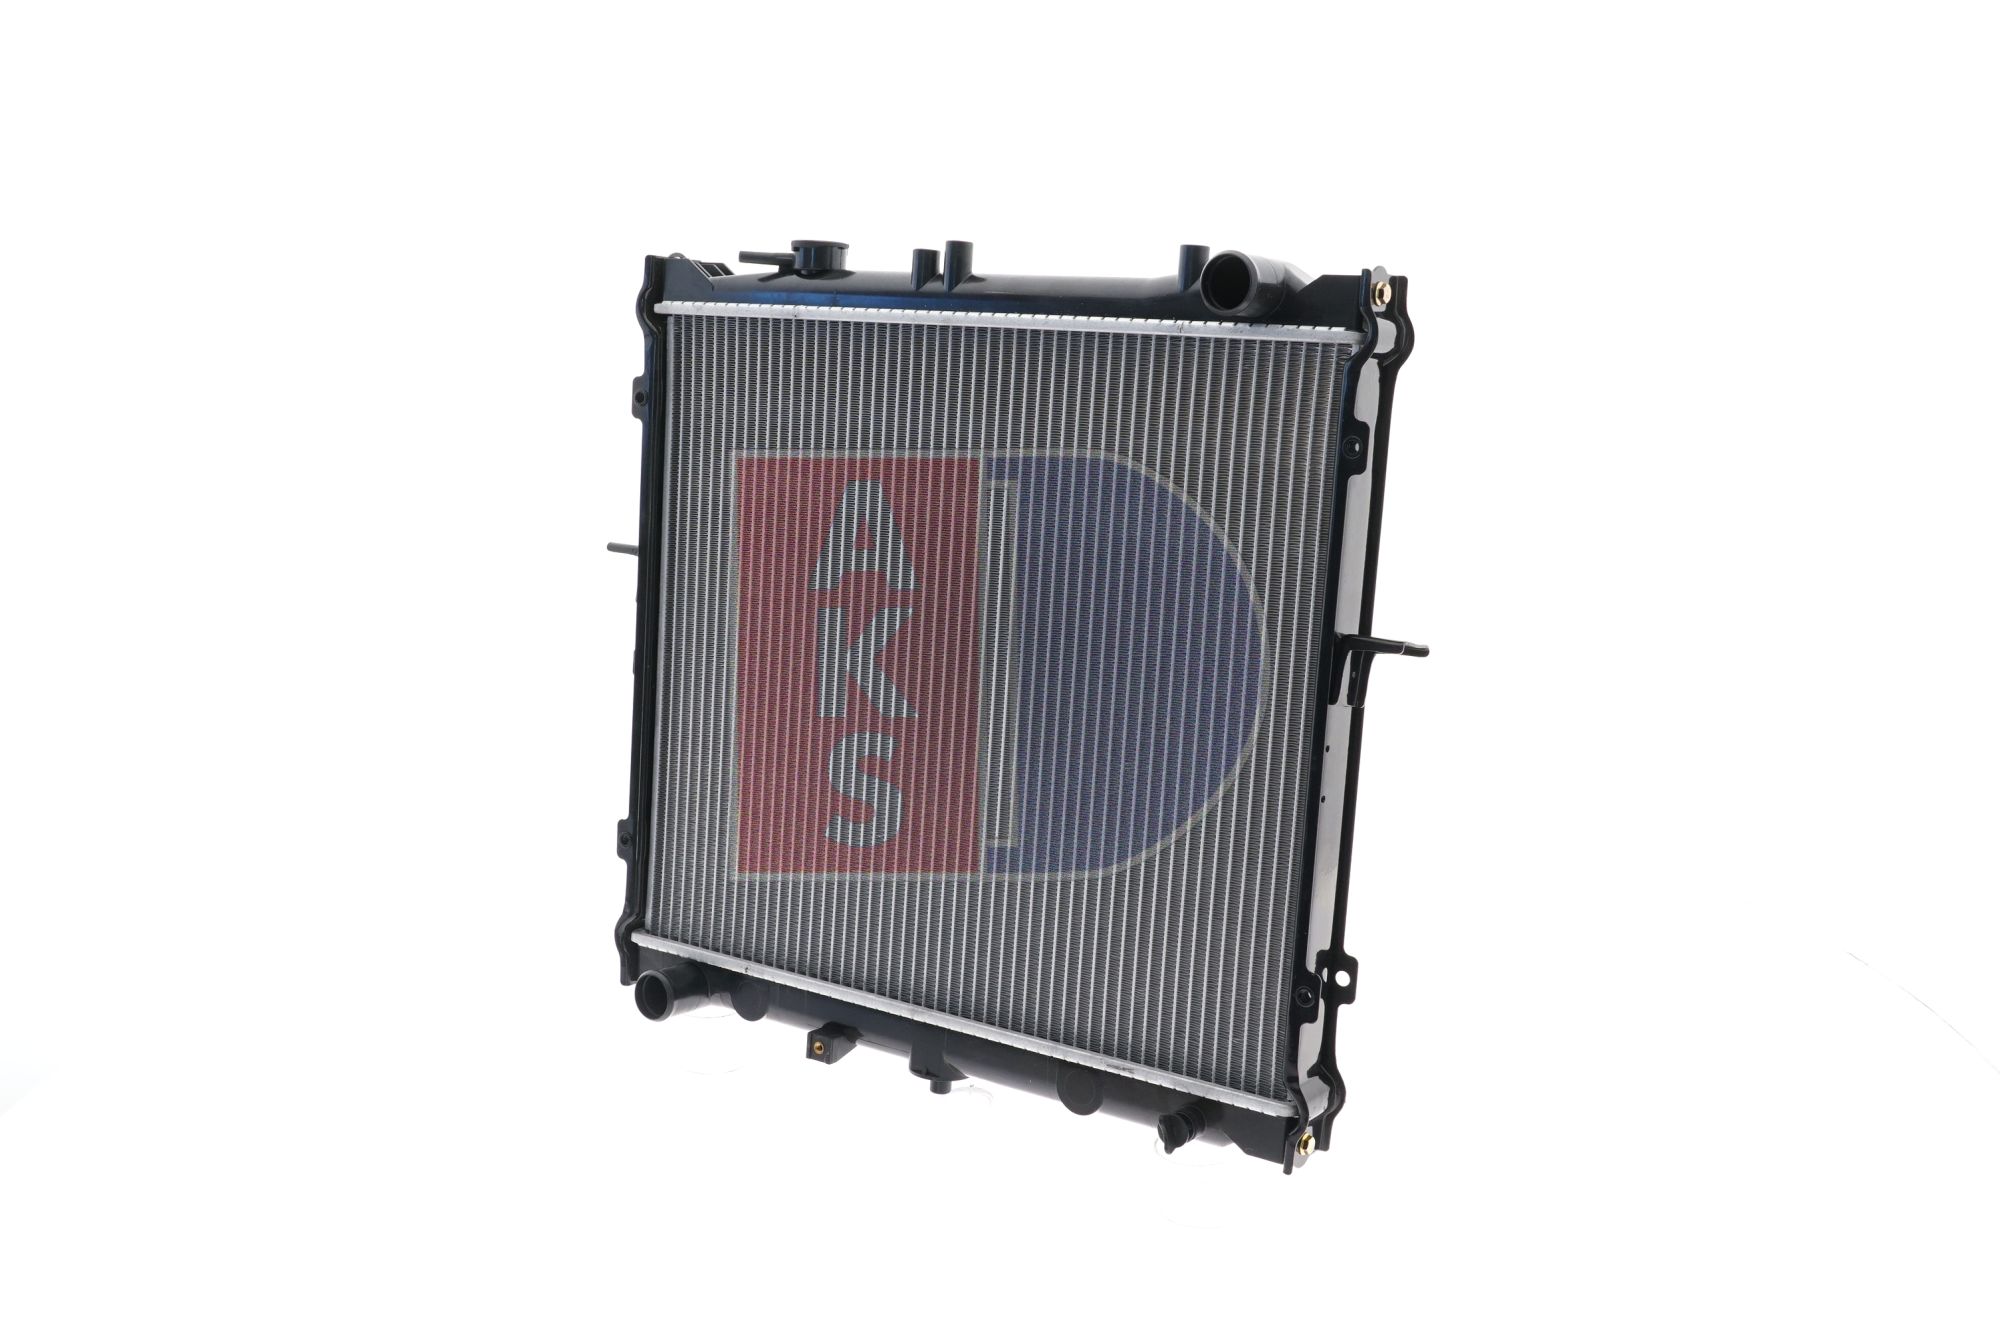 AKS DASIS 510130N Engine radiator for vehicles with/without air conditioning, 450 x 524 x 28 mm, Manual Transmission, Brazed cooling fins